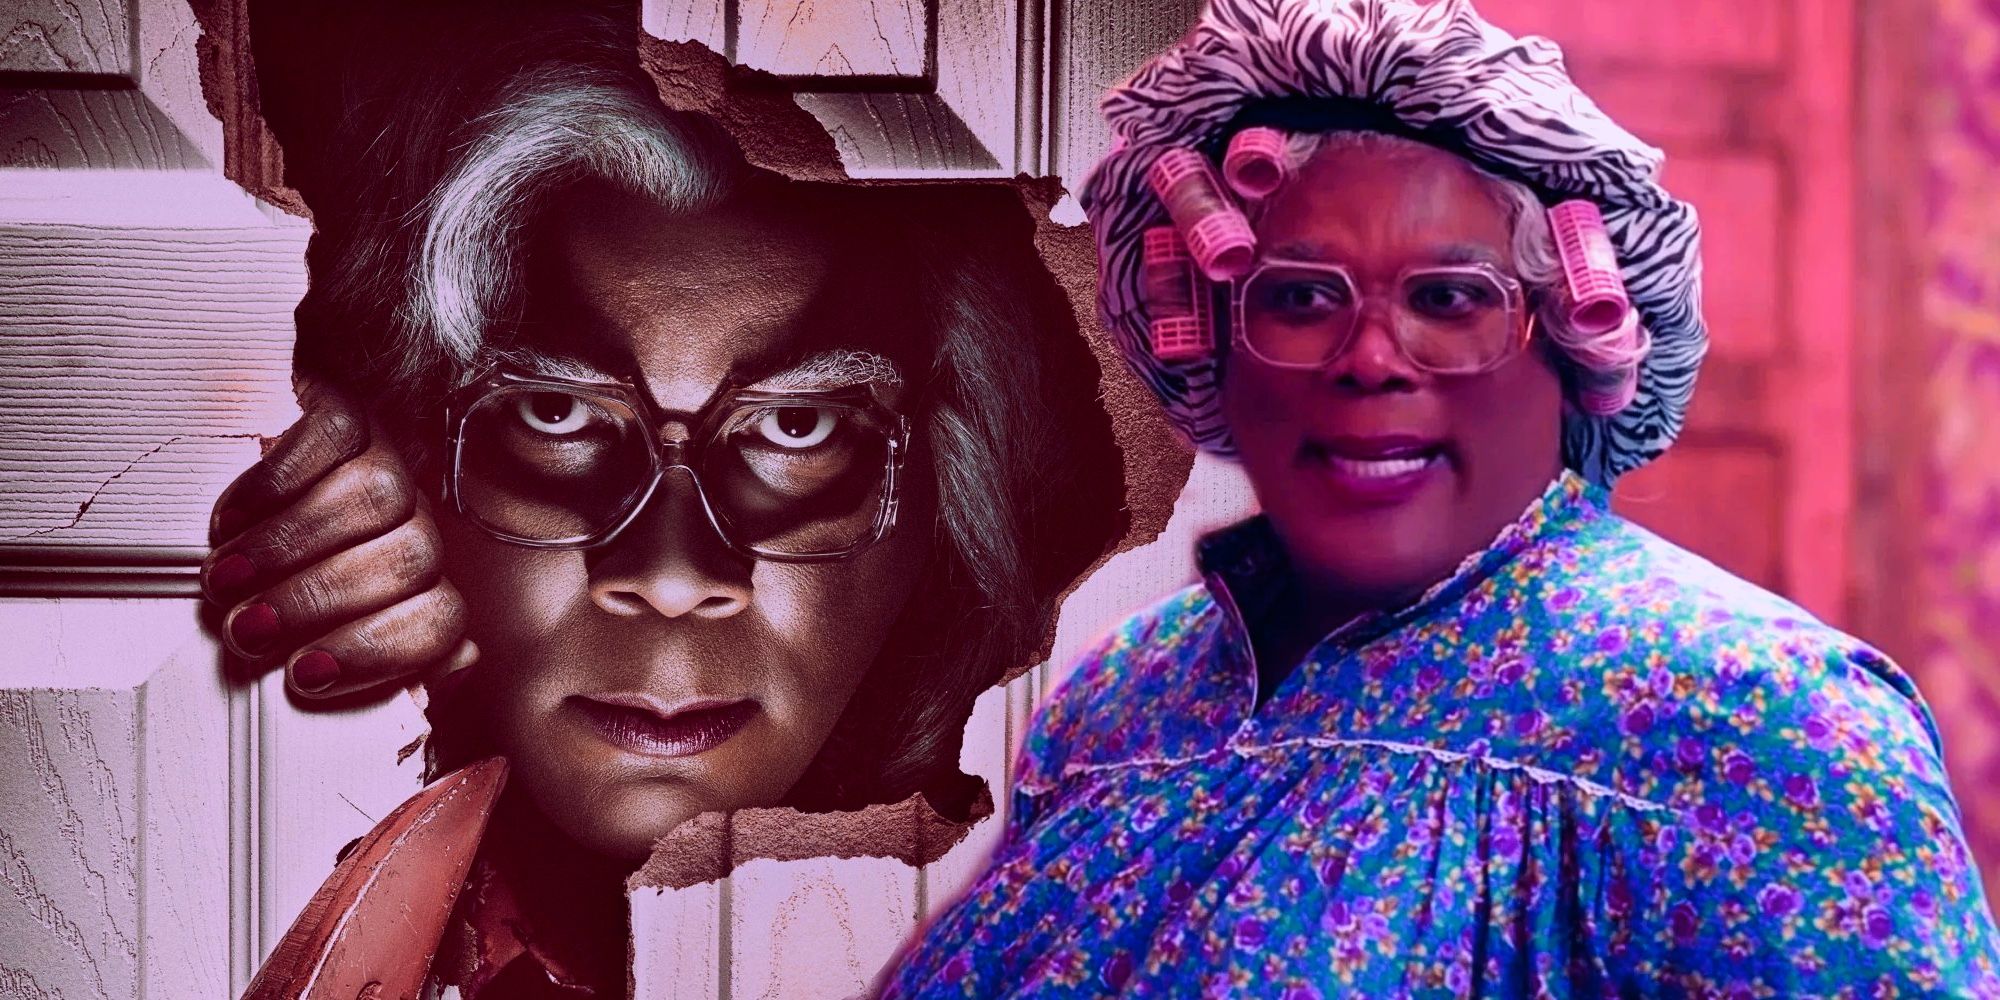 Is A Madea The Last One? Will There Be Another Madea Movie?